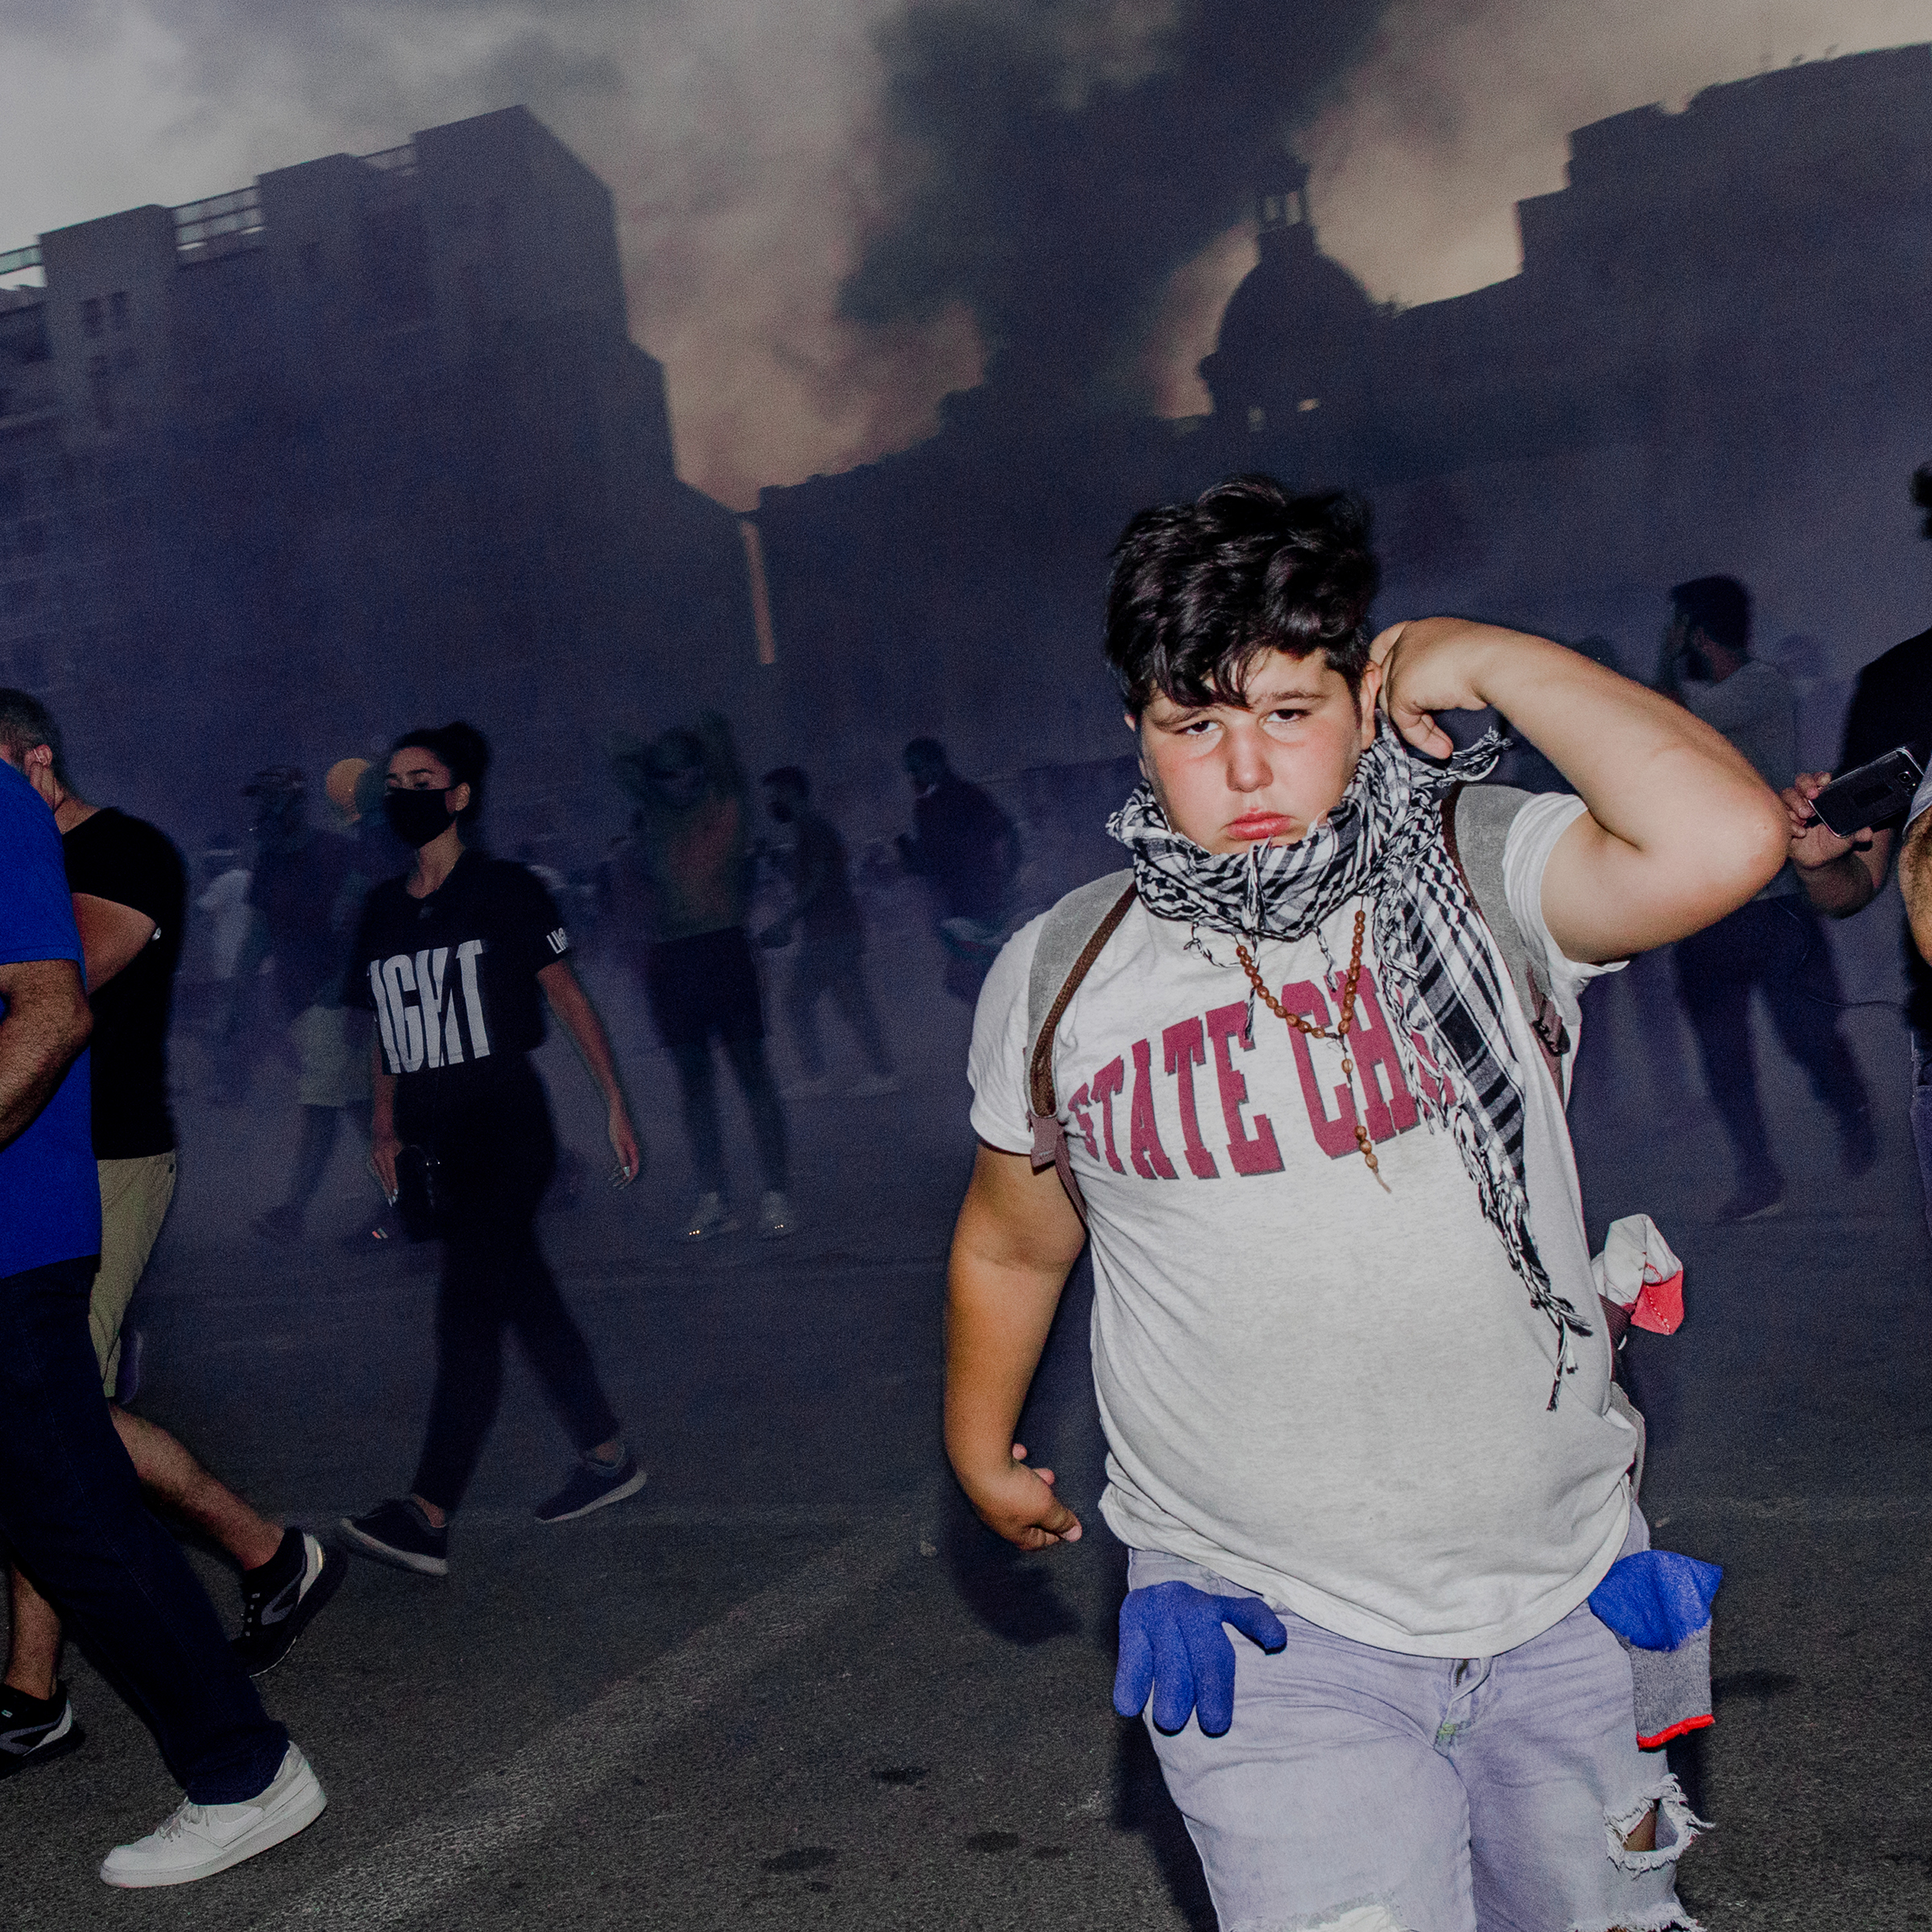 A young protester near Beirut's Martyrs' Square during the Aug. 8 demonstration. (Myriam Boulos for TIME)